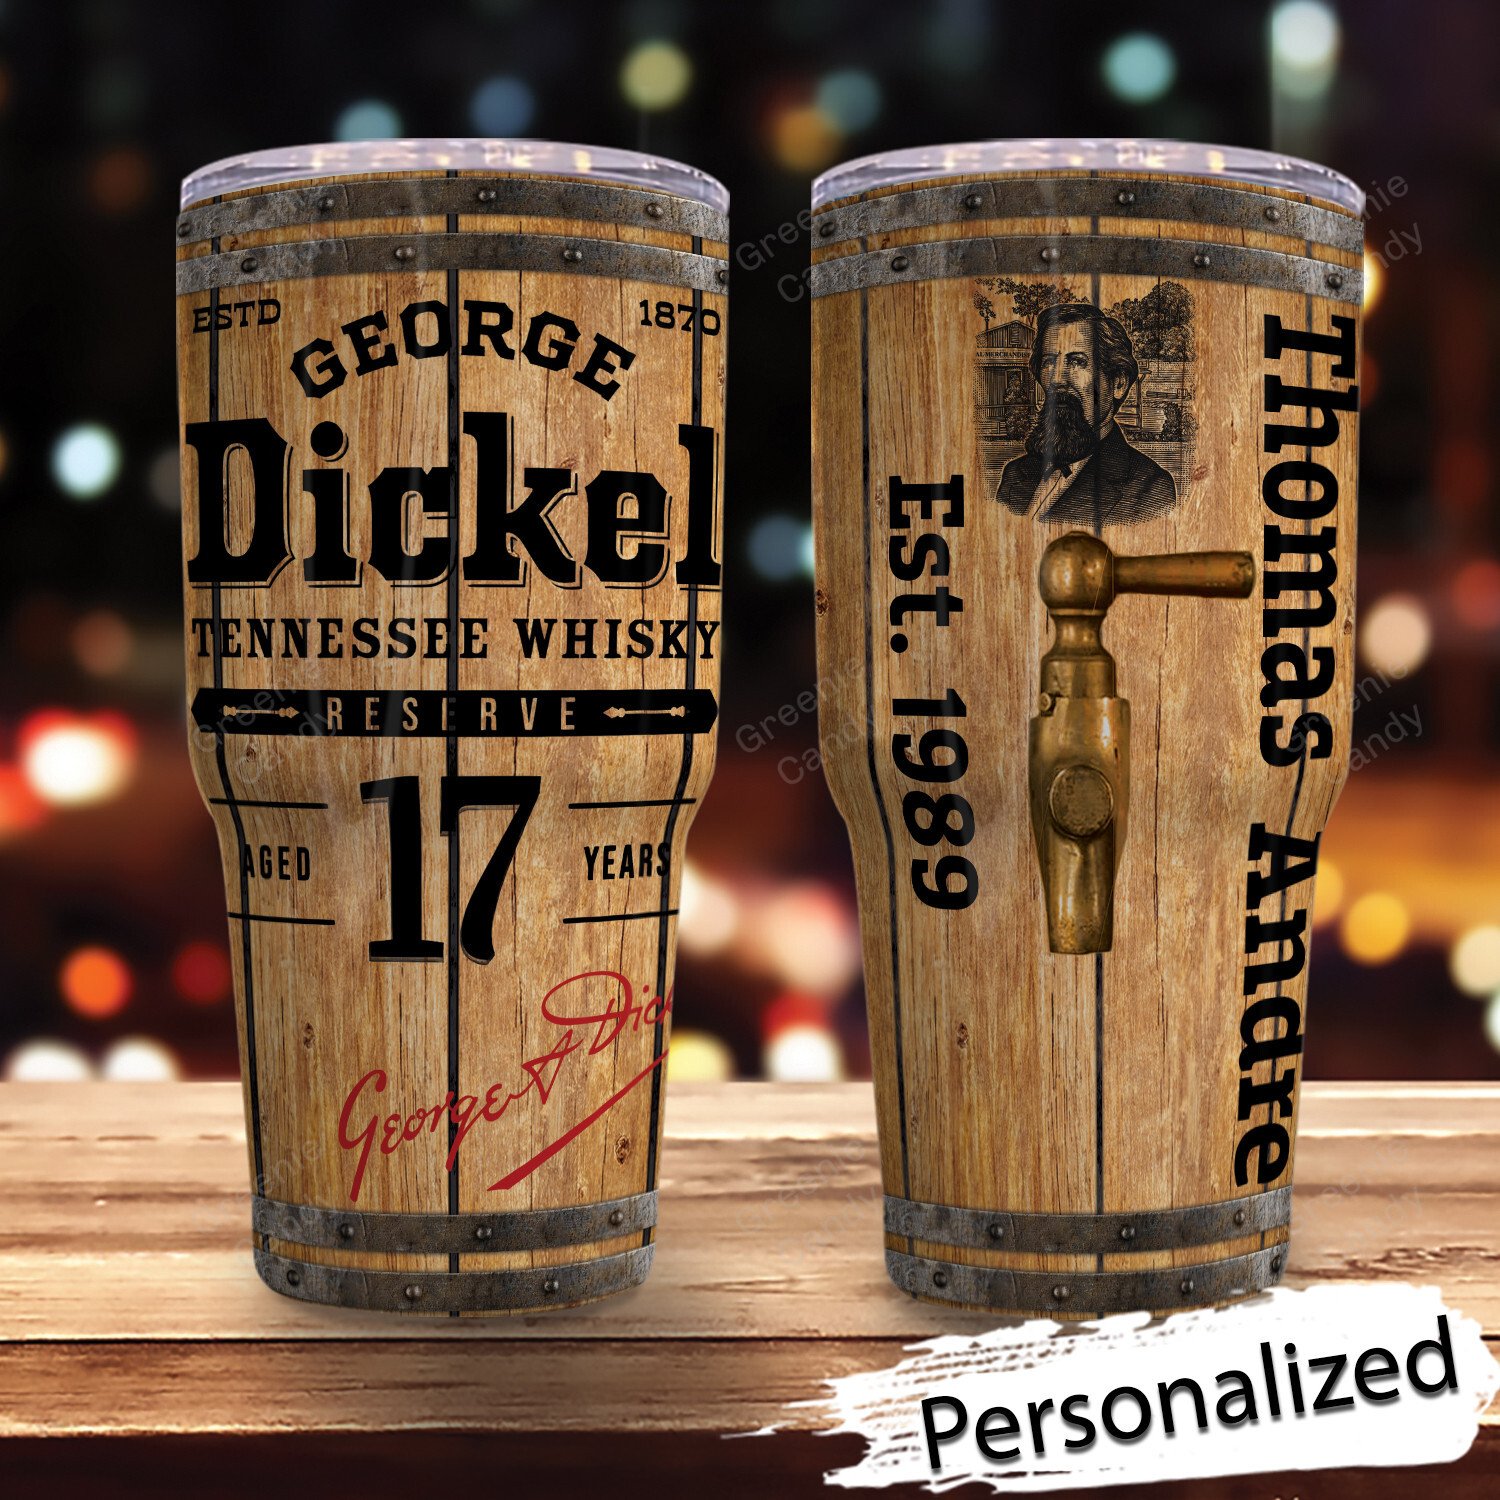 Personalized_George_Dickel_Tennessee_Whiskey_Tumbler